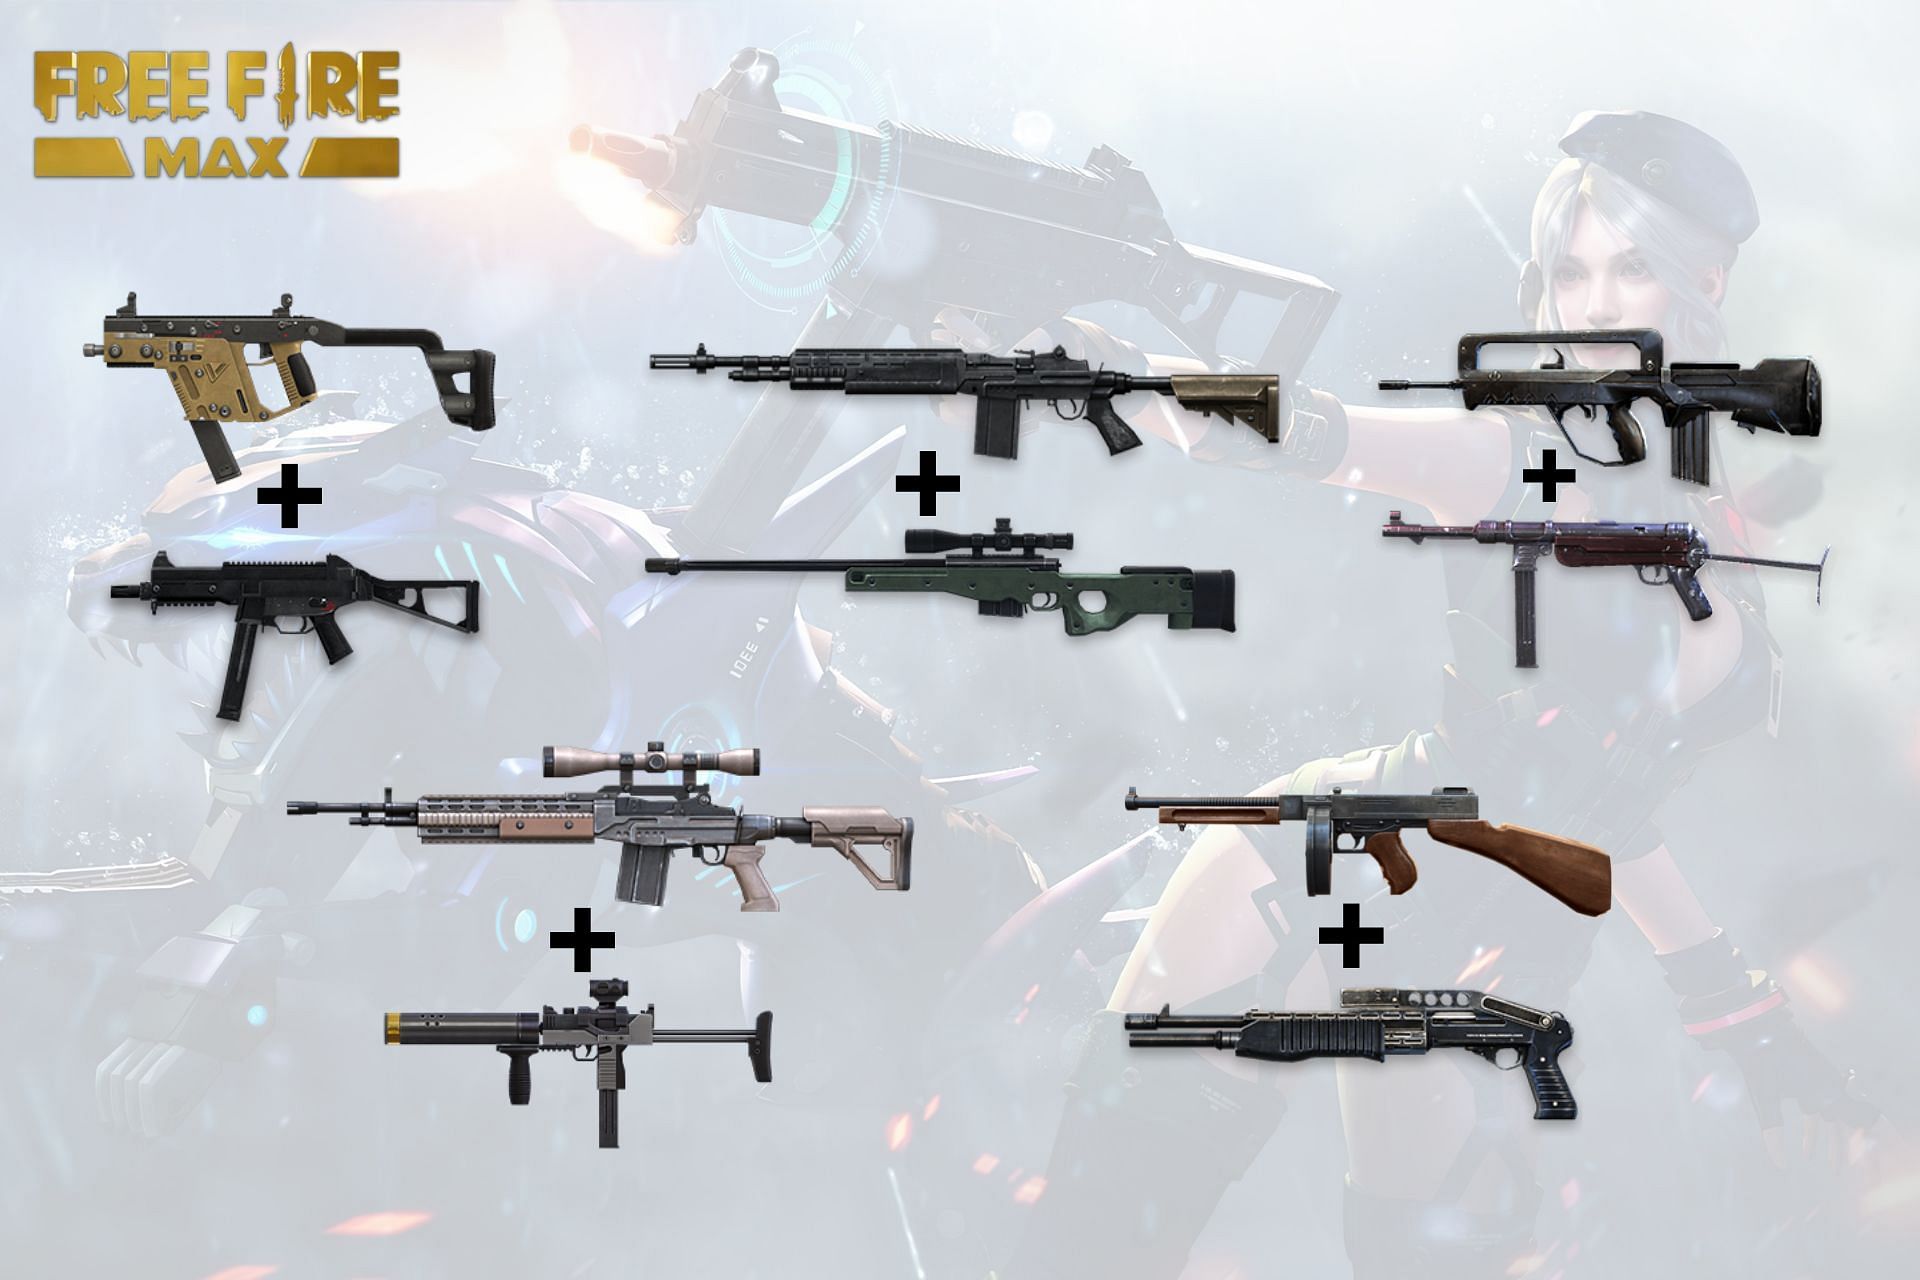 There&#039;s a gun combo for every occasion in Free Fire MAX (Image via Sportskeeda)